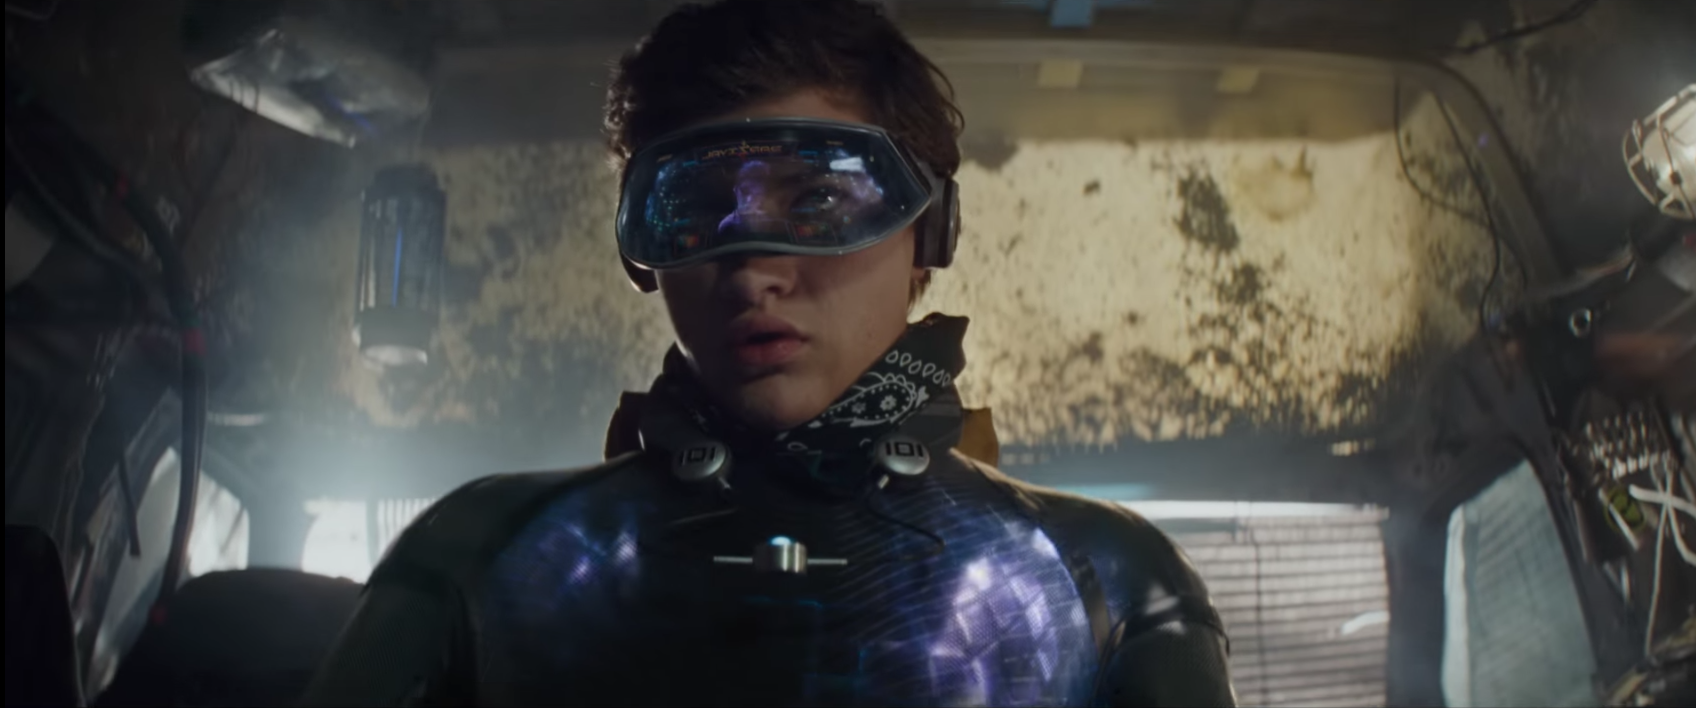 Ready Player One, Steven Spielberg's movie adaptation, reviewed.